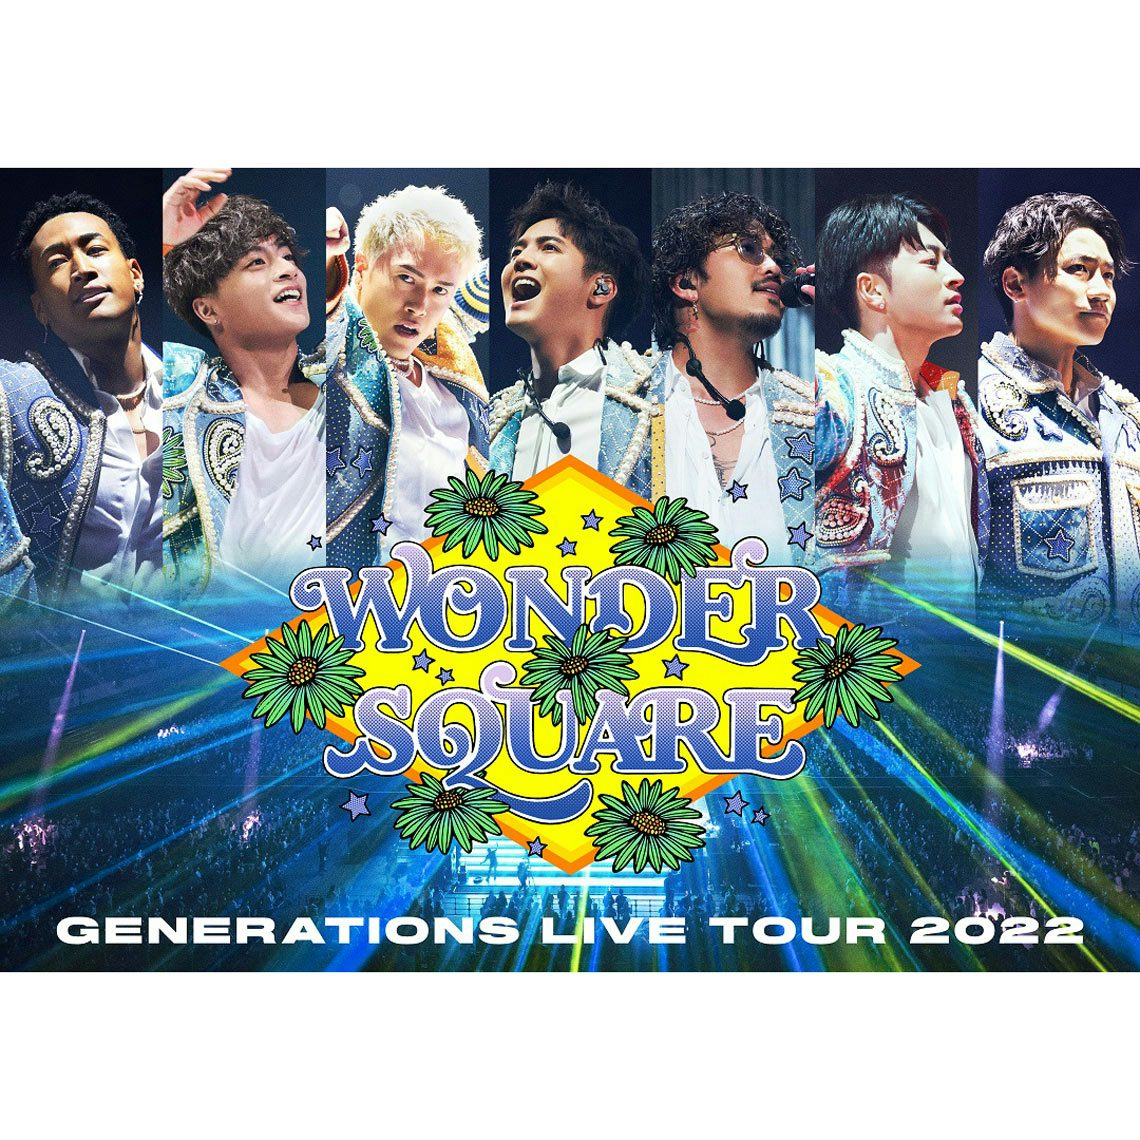 GENERATIONS from EXILE TRIBE GENERATIONS LIVE TOUR 2022 “WONDER